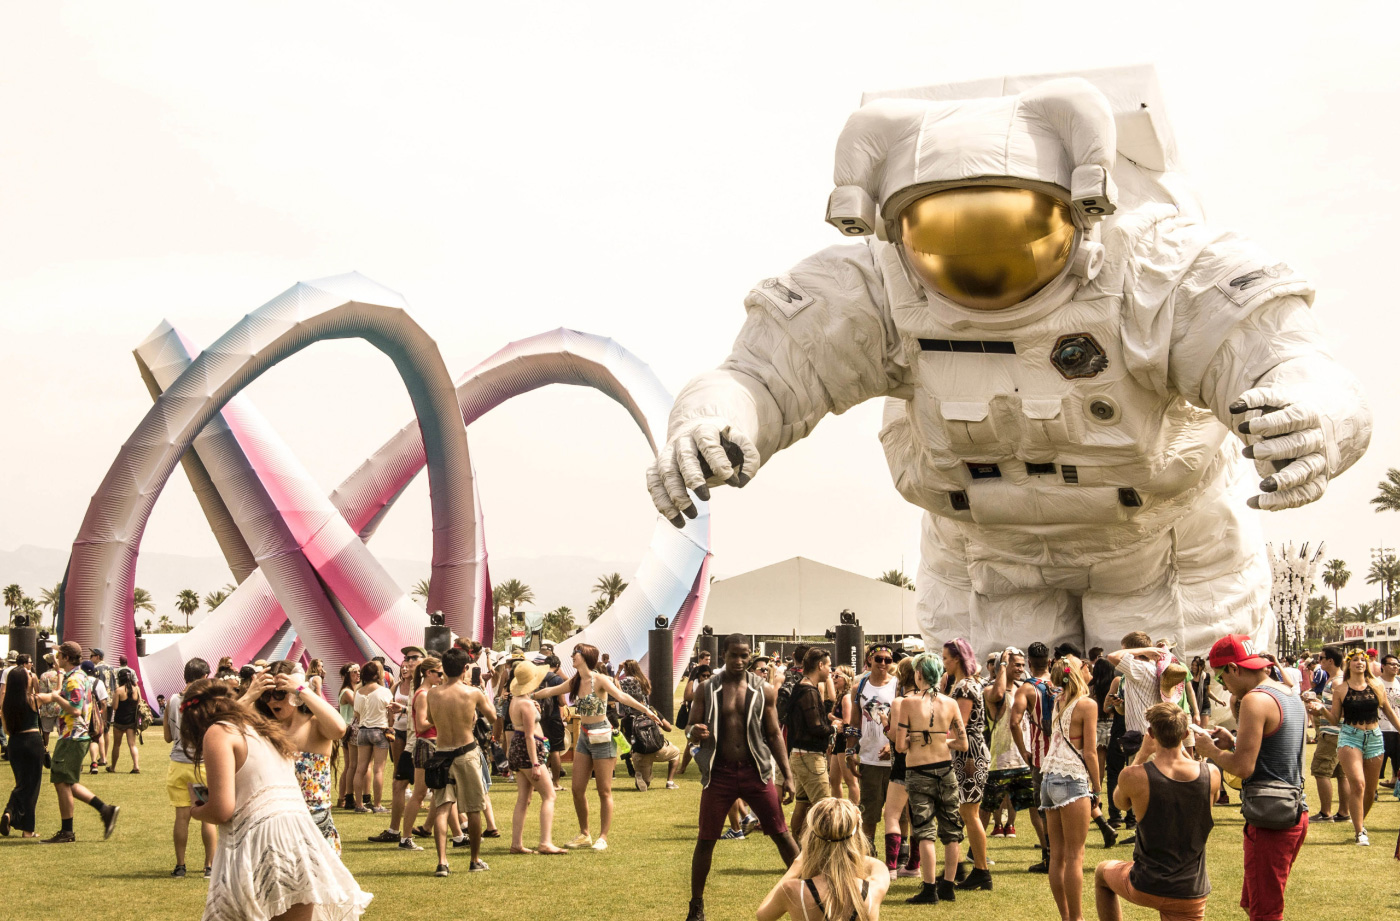 A giant inflatable astronaut at Coachella